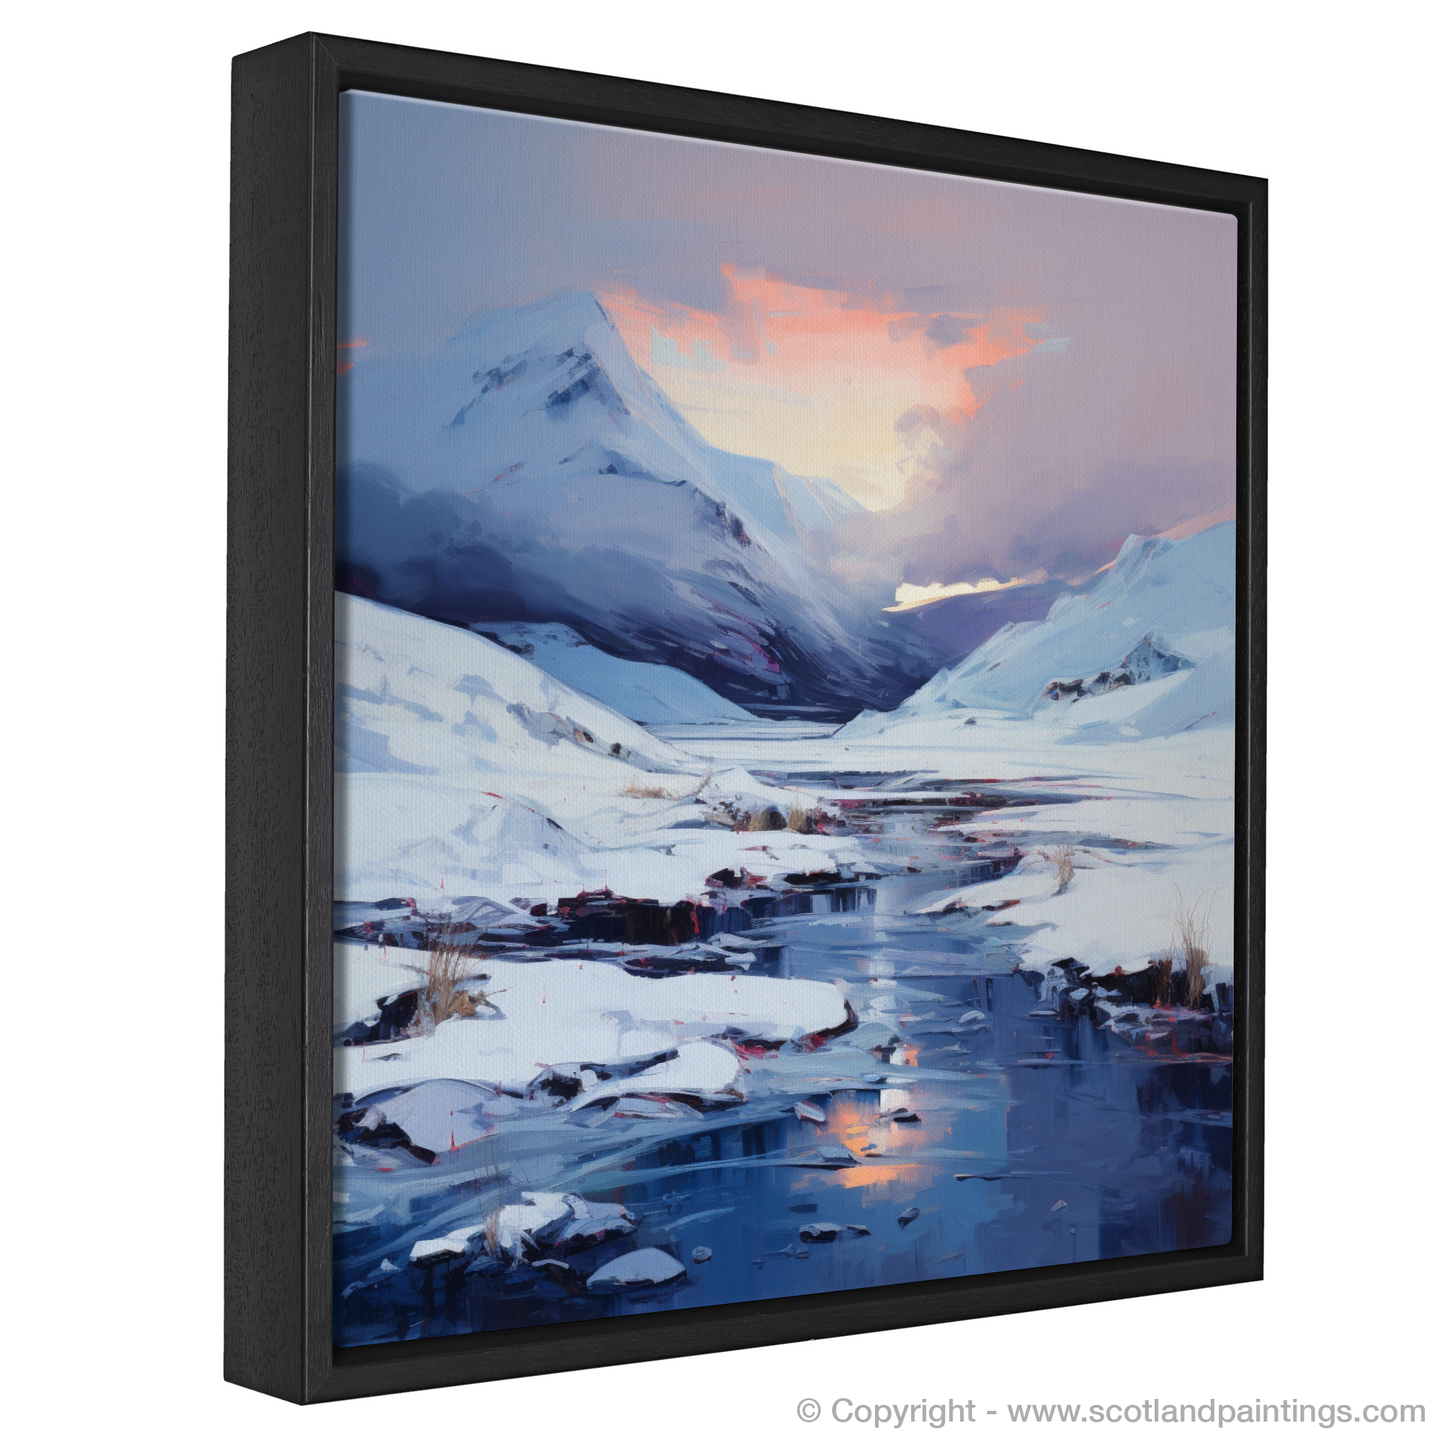 Painting and Art Print of Pristine snow at dusk in Glencoe entitled "Dusk's Embrace over Snowy Glencoe".